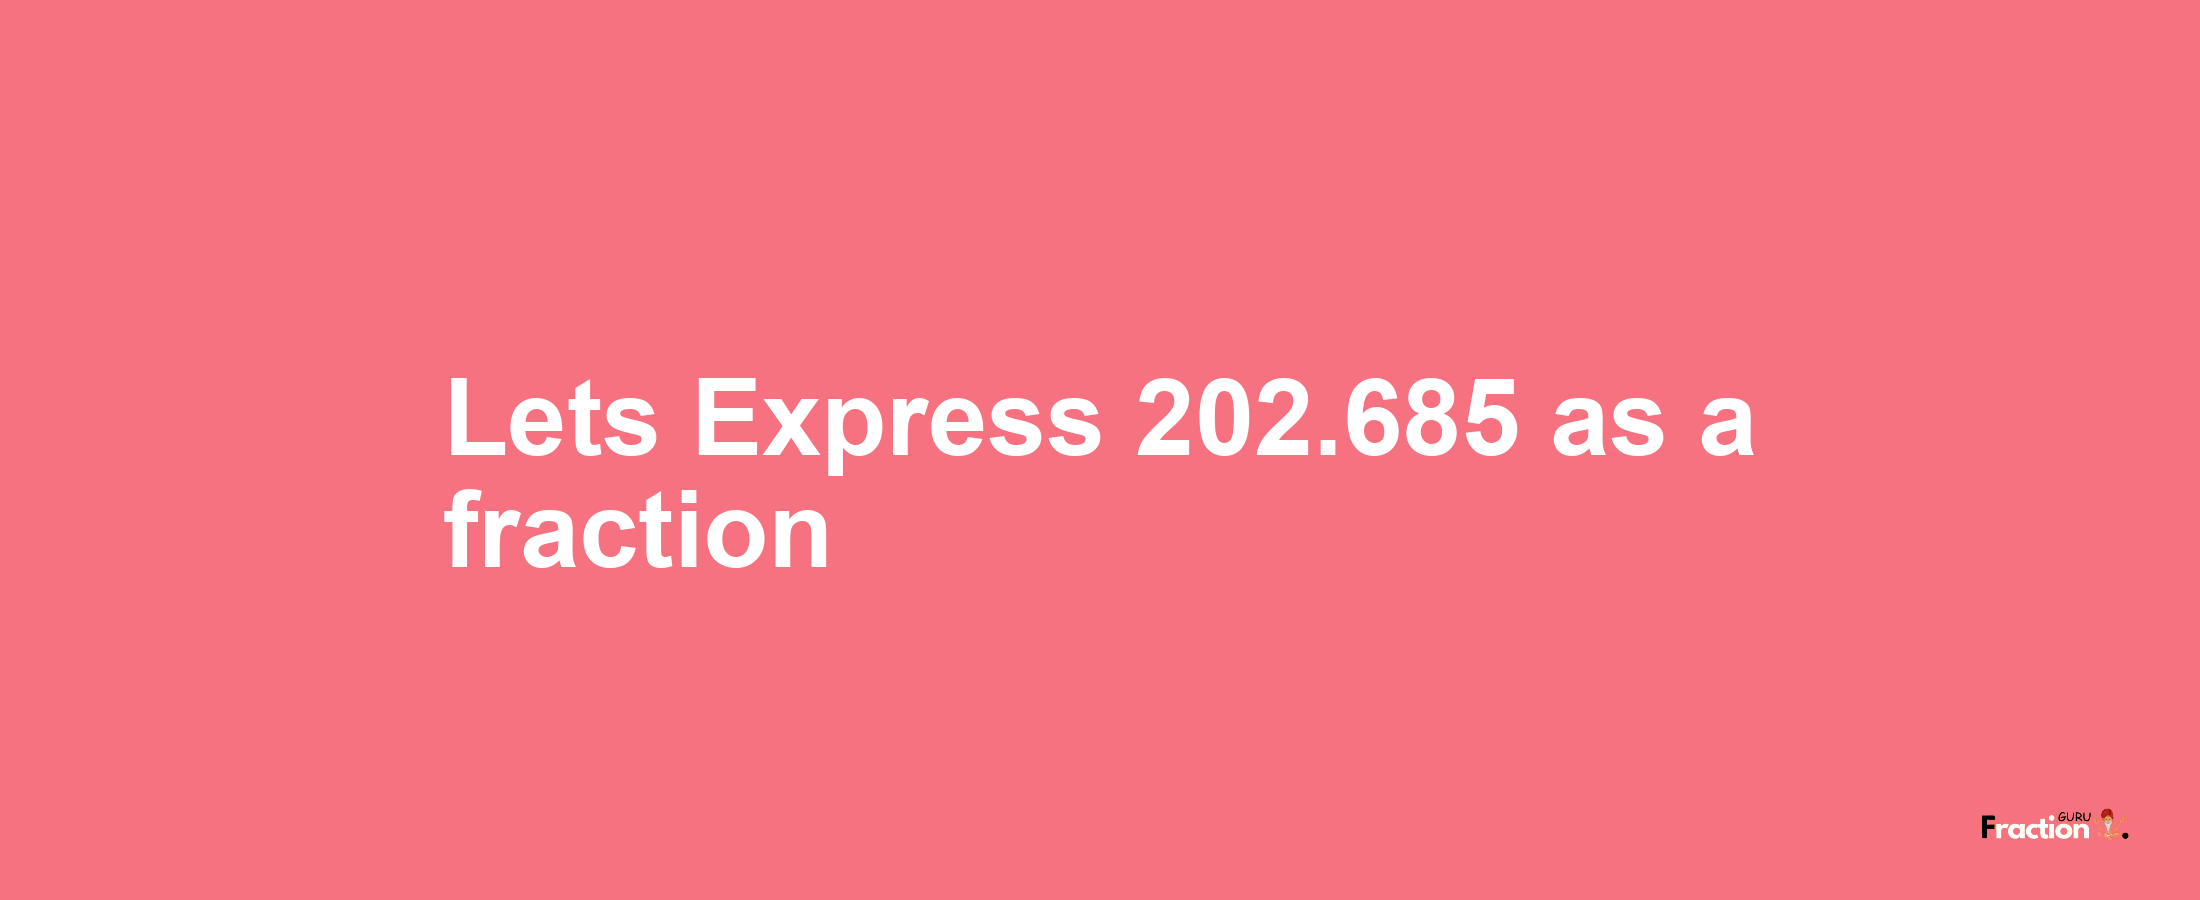 Lets Express 202.685 as afraction